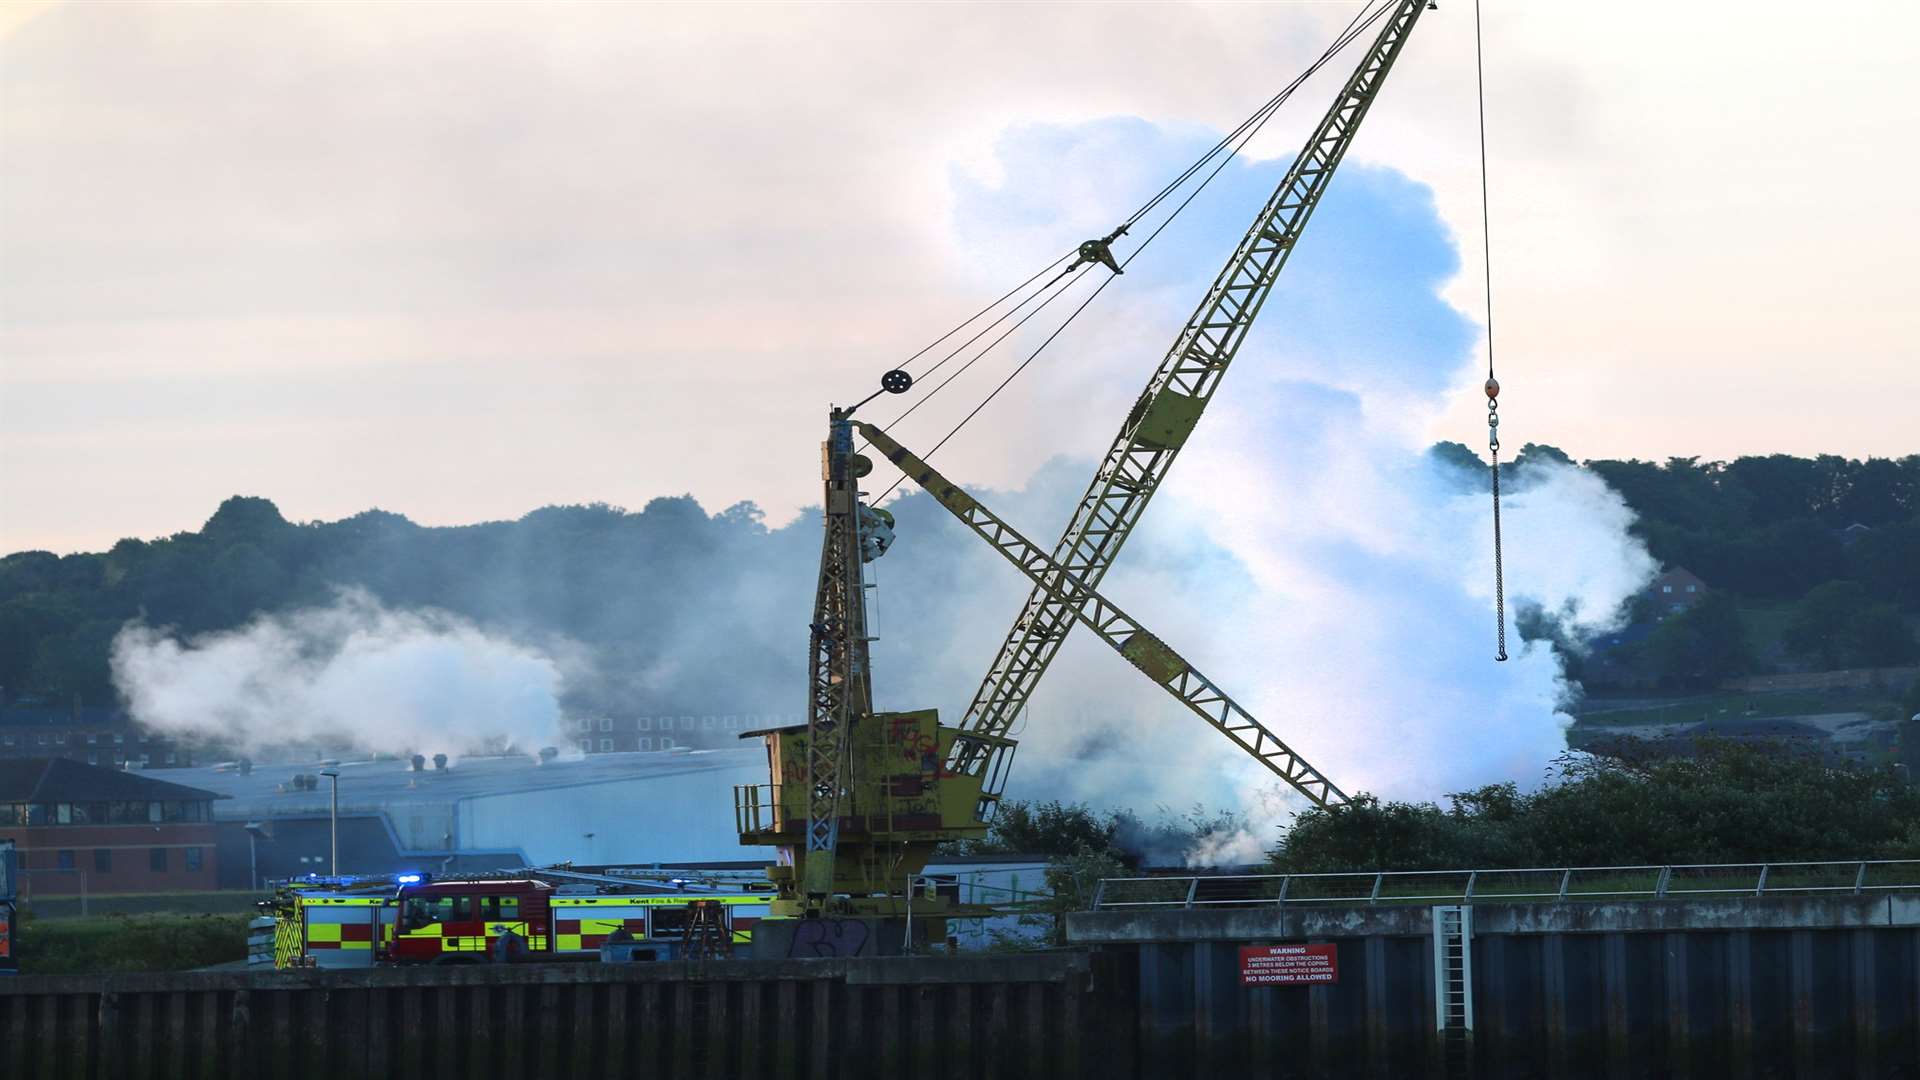 Firefighters at Acorn Shipyard on Tuesday morning. Pic: Keith Thompson